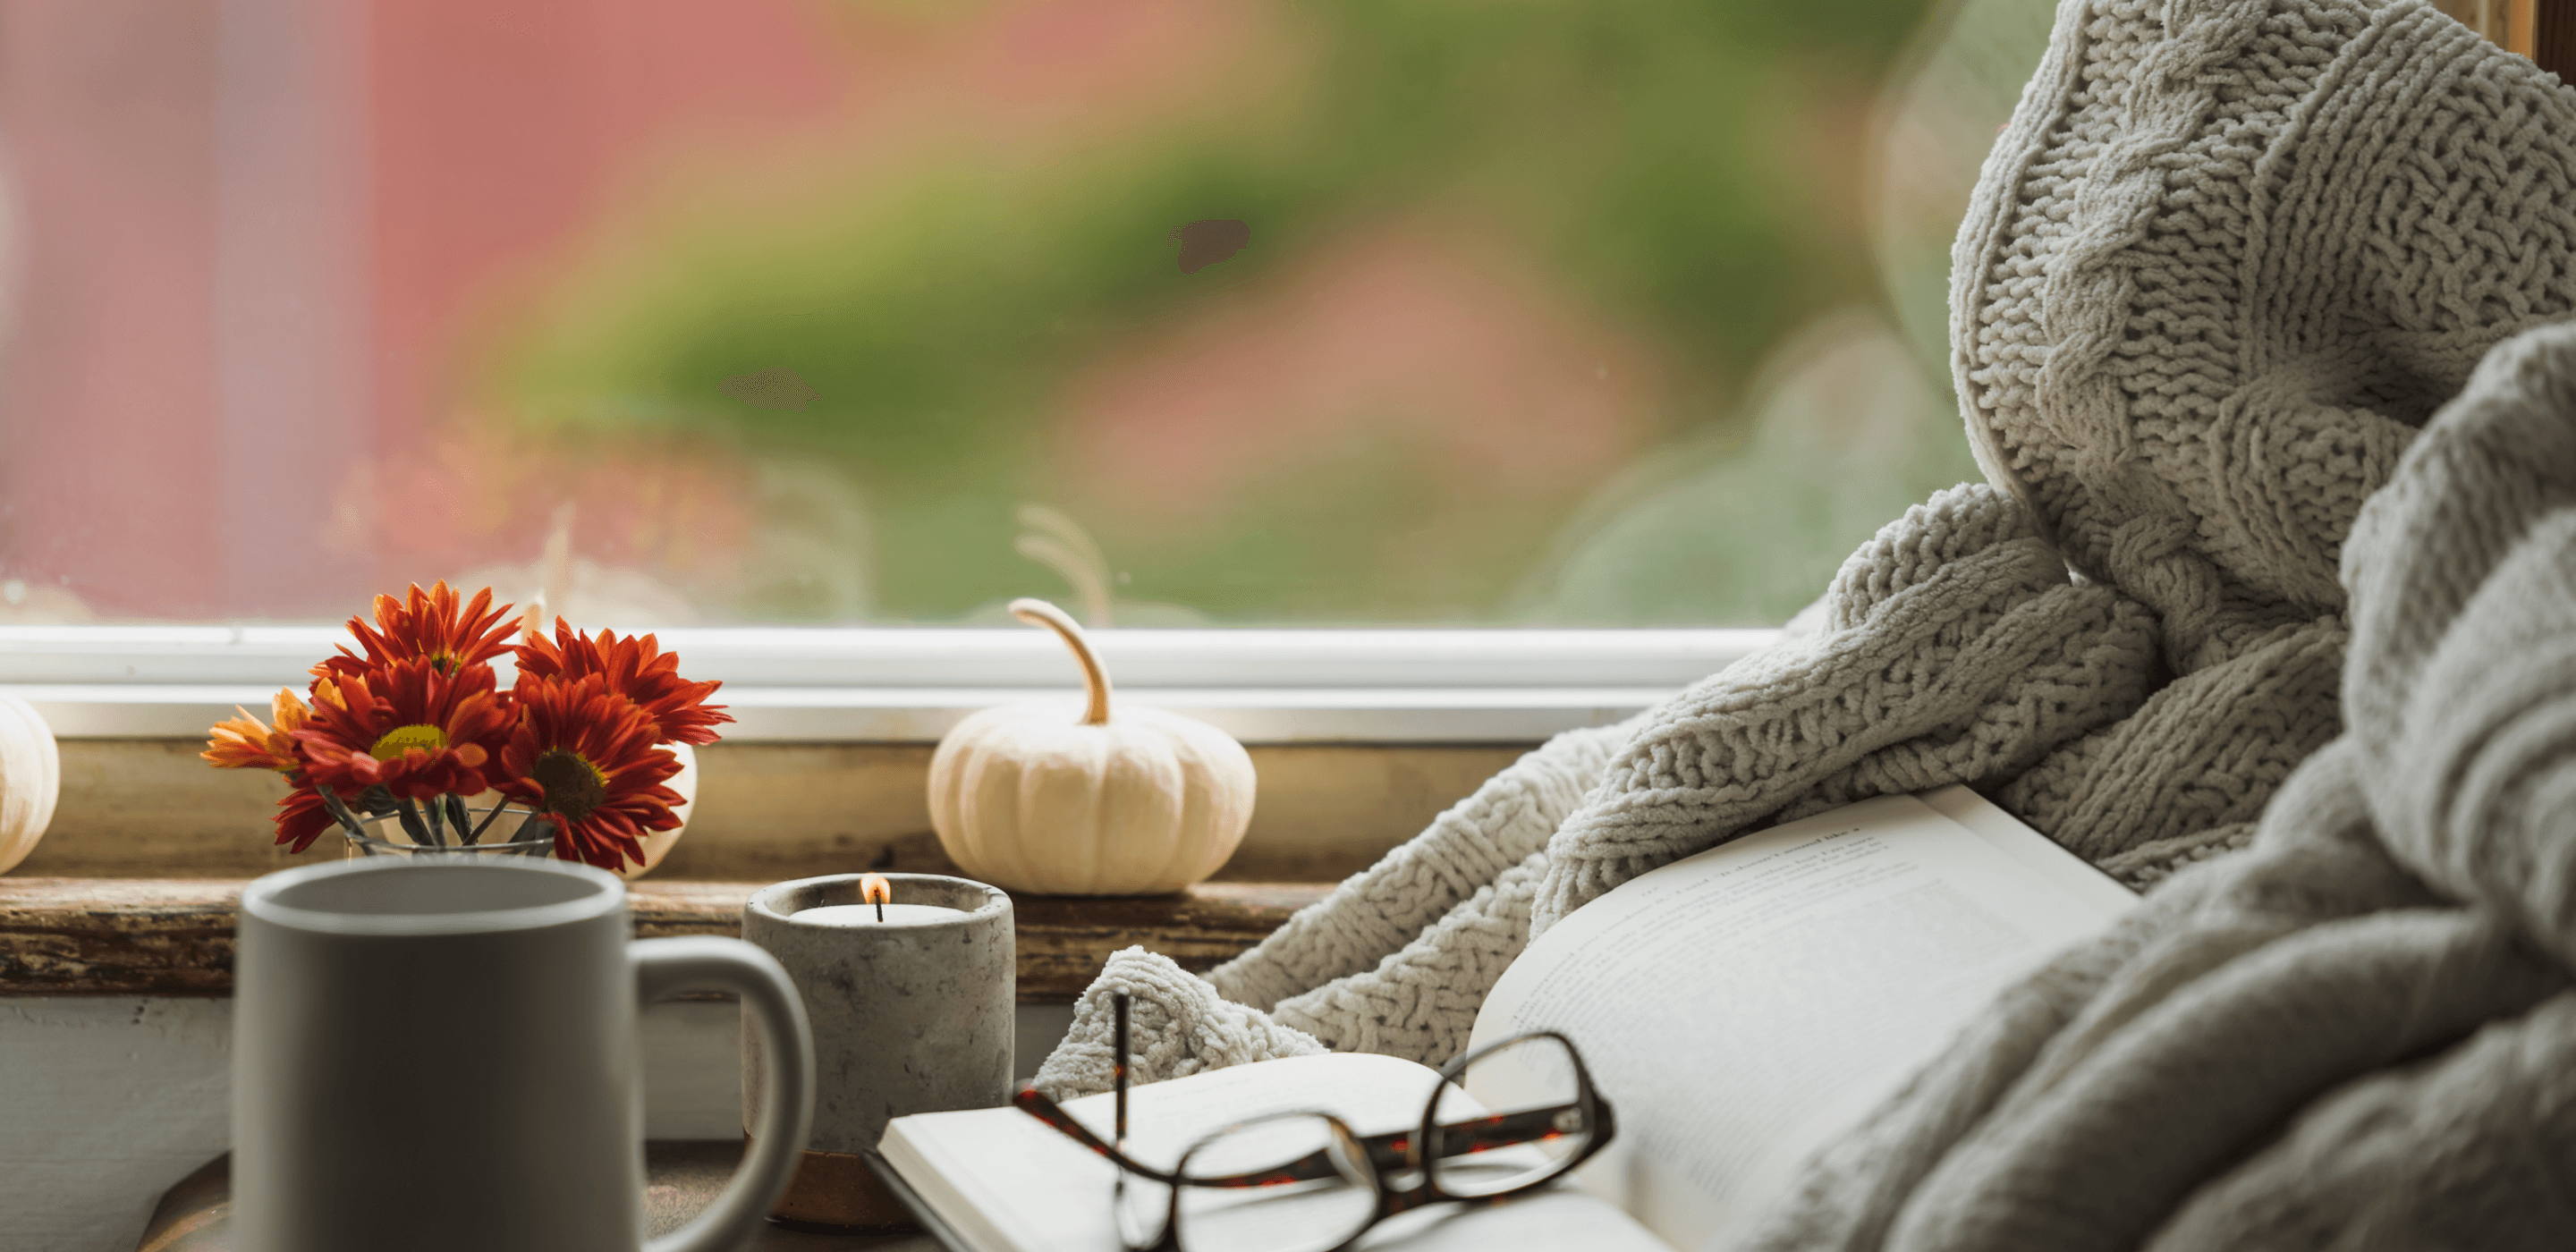 A white pumpkin sitting on a window sill, near a lit candle, a pair of glasses, a book, and a blanket.